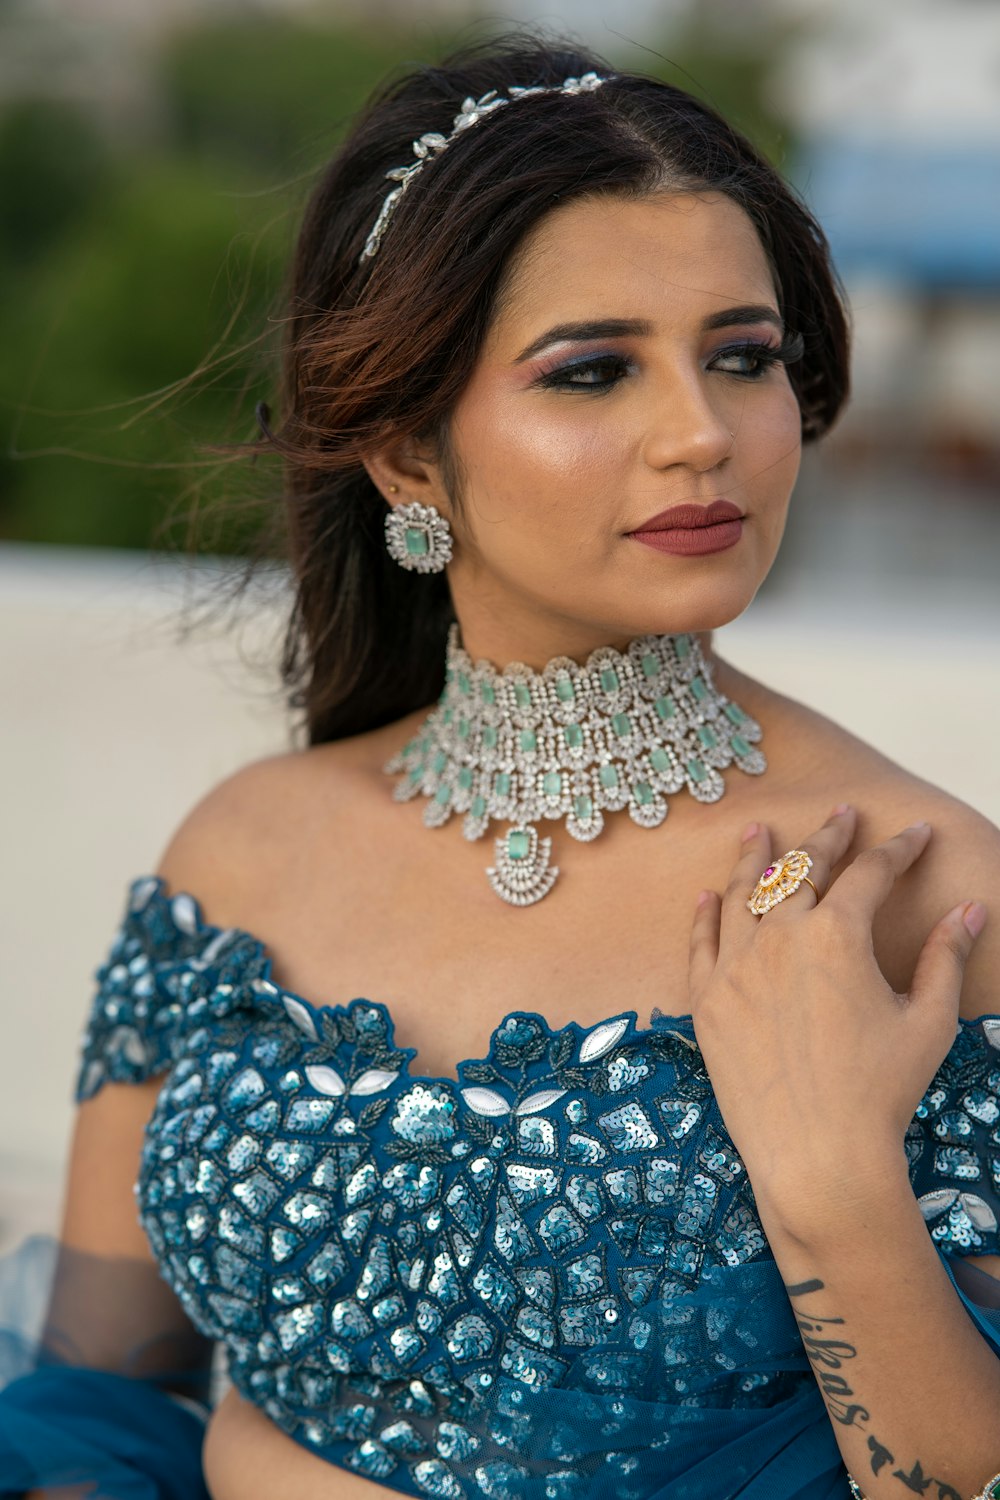 a woman in a blue dress wearing a necklace and earrings